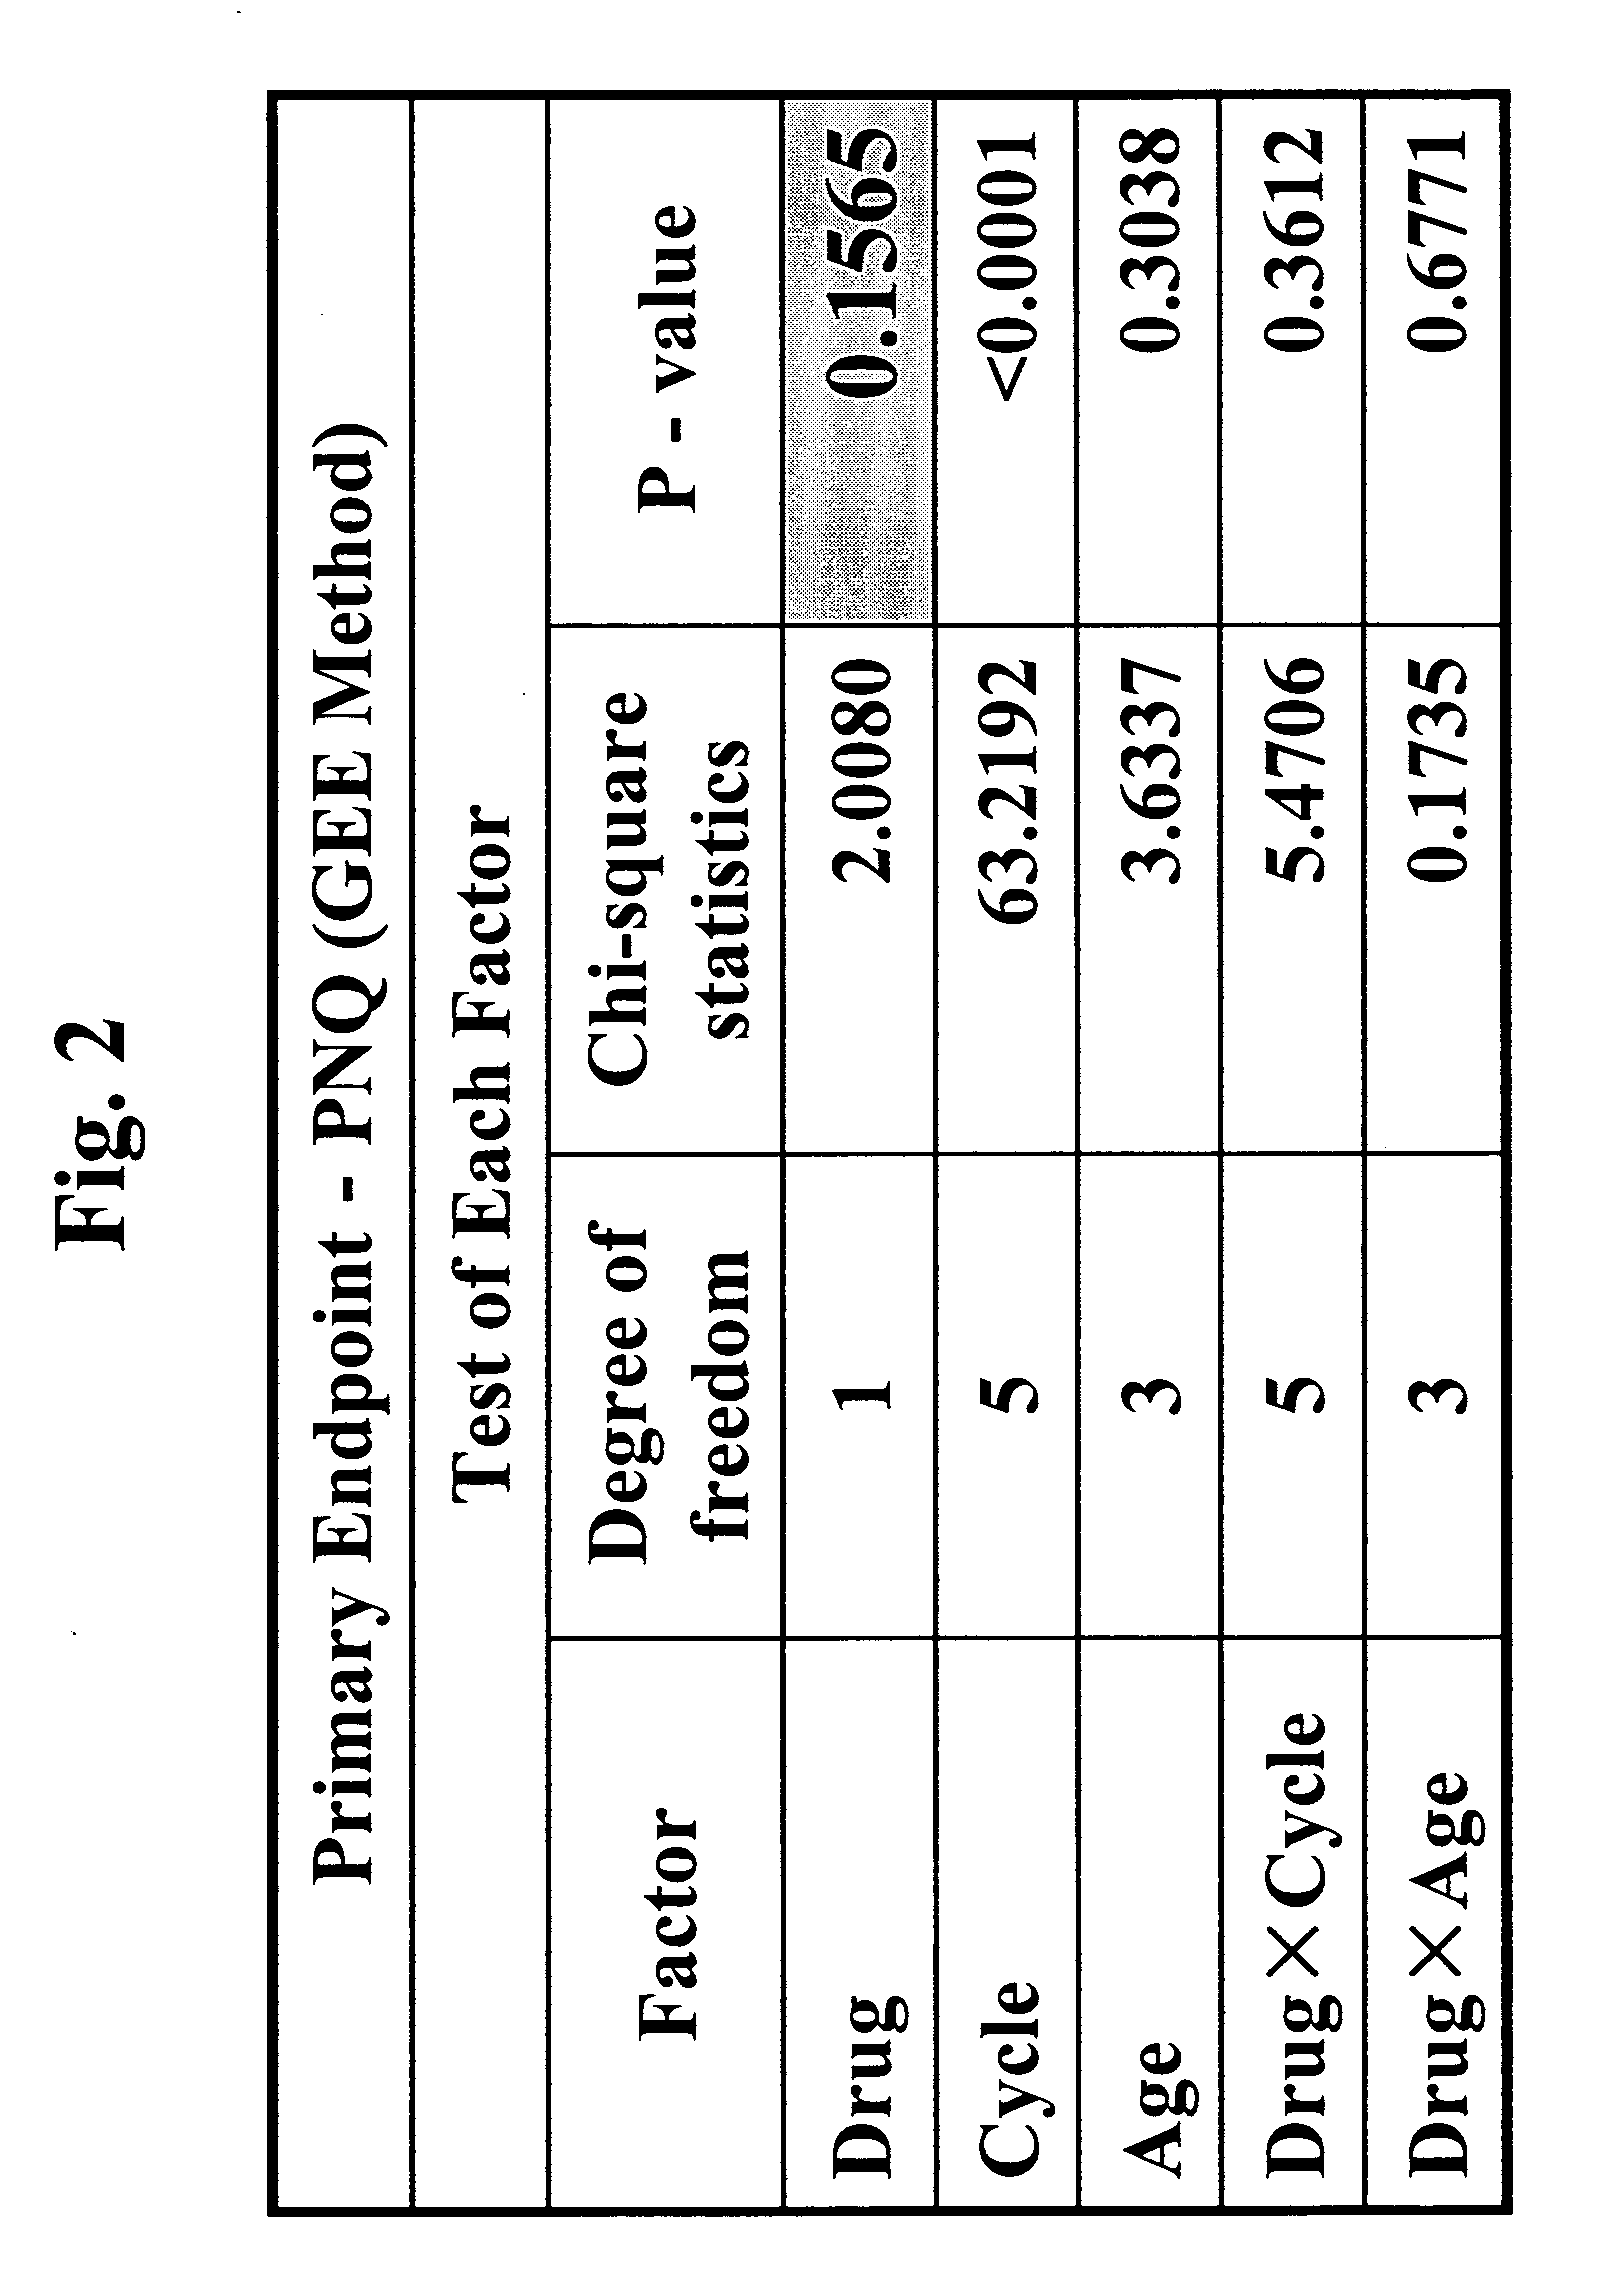 Treatment methods and compositions for lung cancer, adenocarcinoma, and other medical conditions